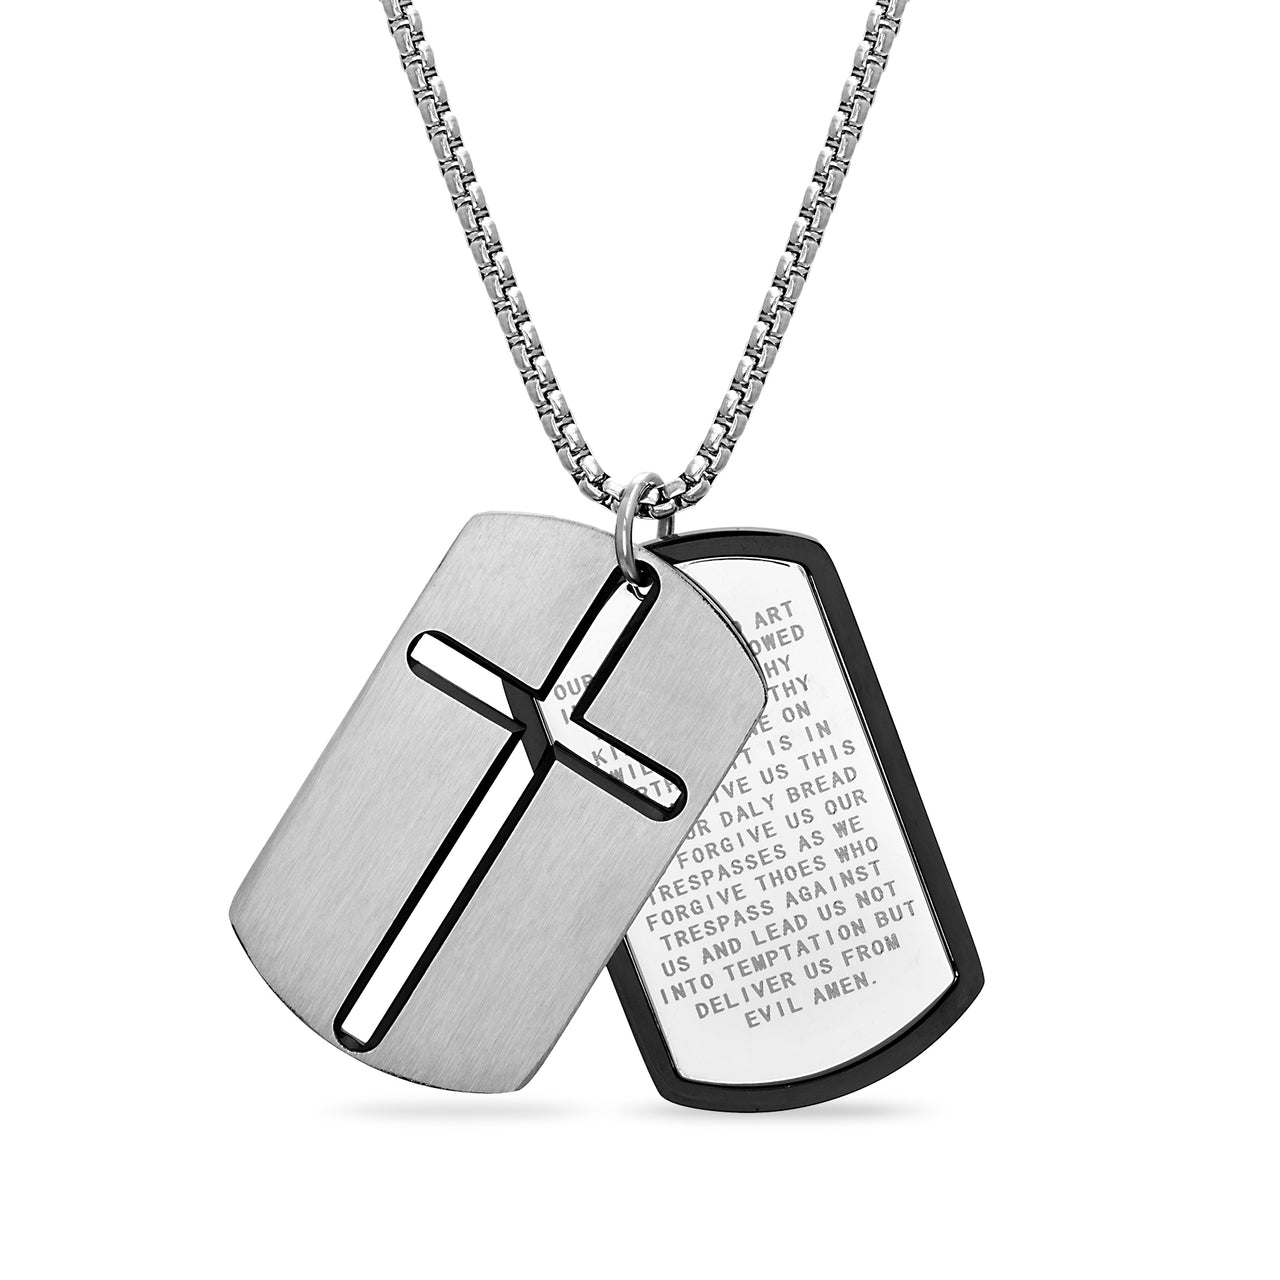 My Bible Stainless Steel Cross and Lords Prayer Dog Tag Necklace